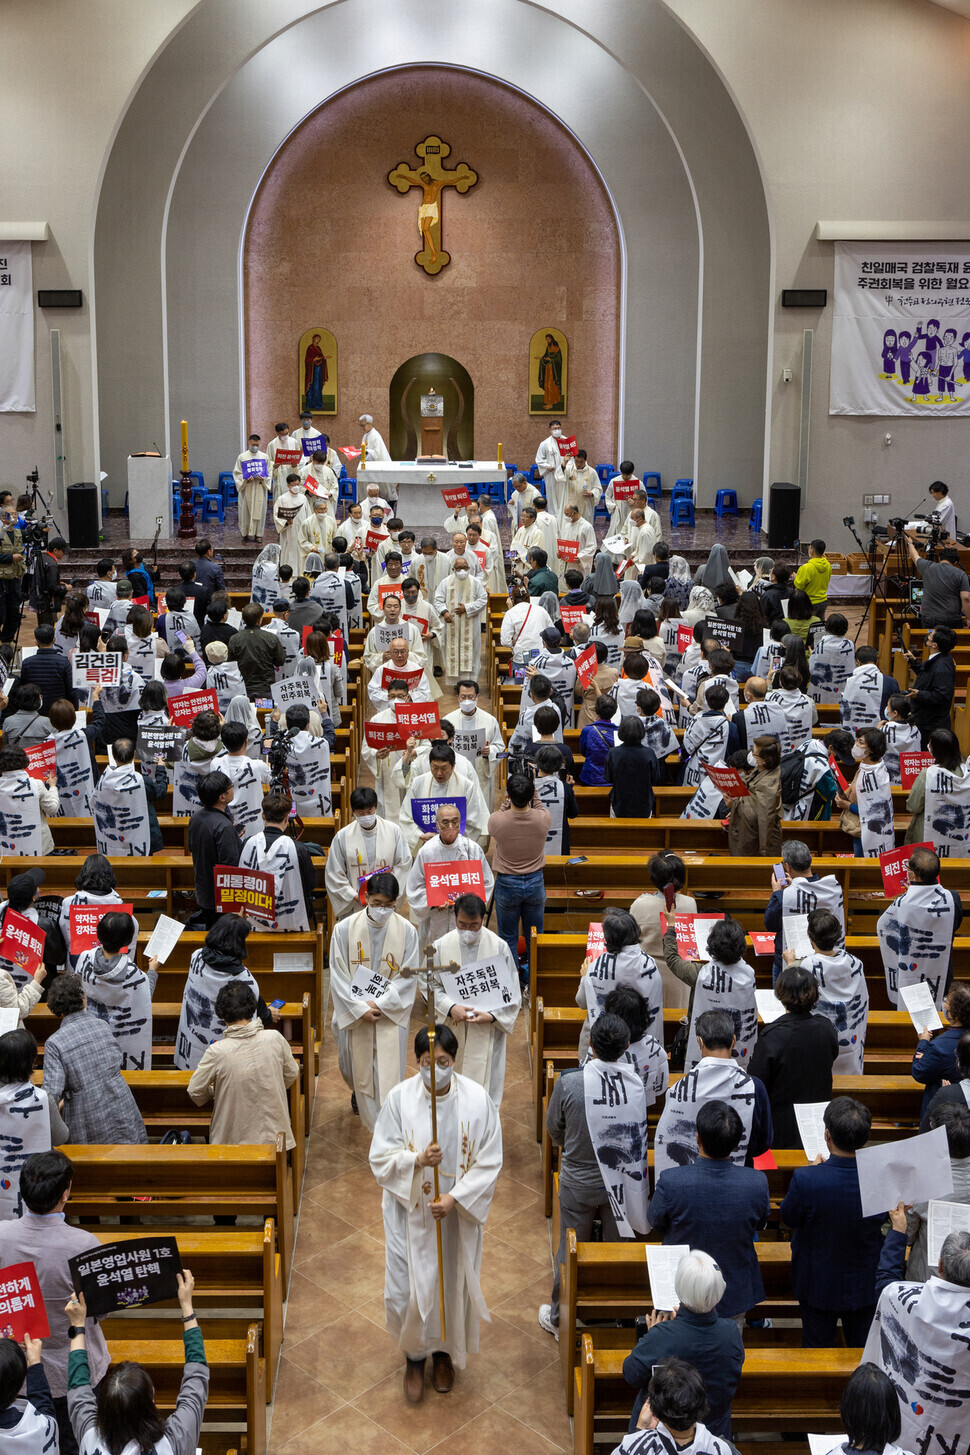 Members of the Catholic Priests' Association for Justice march out of a cathedral in Suwon on April 24 following their prayer meeting there. (Park Seung-hwa/The Hankyoreh)